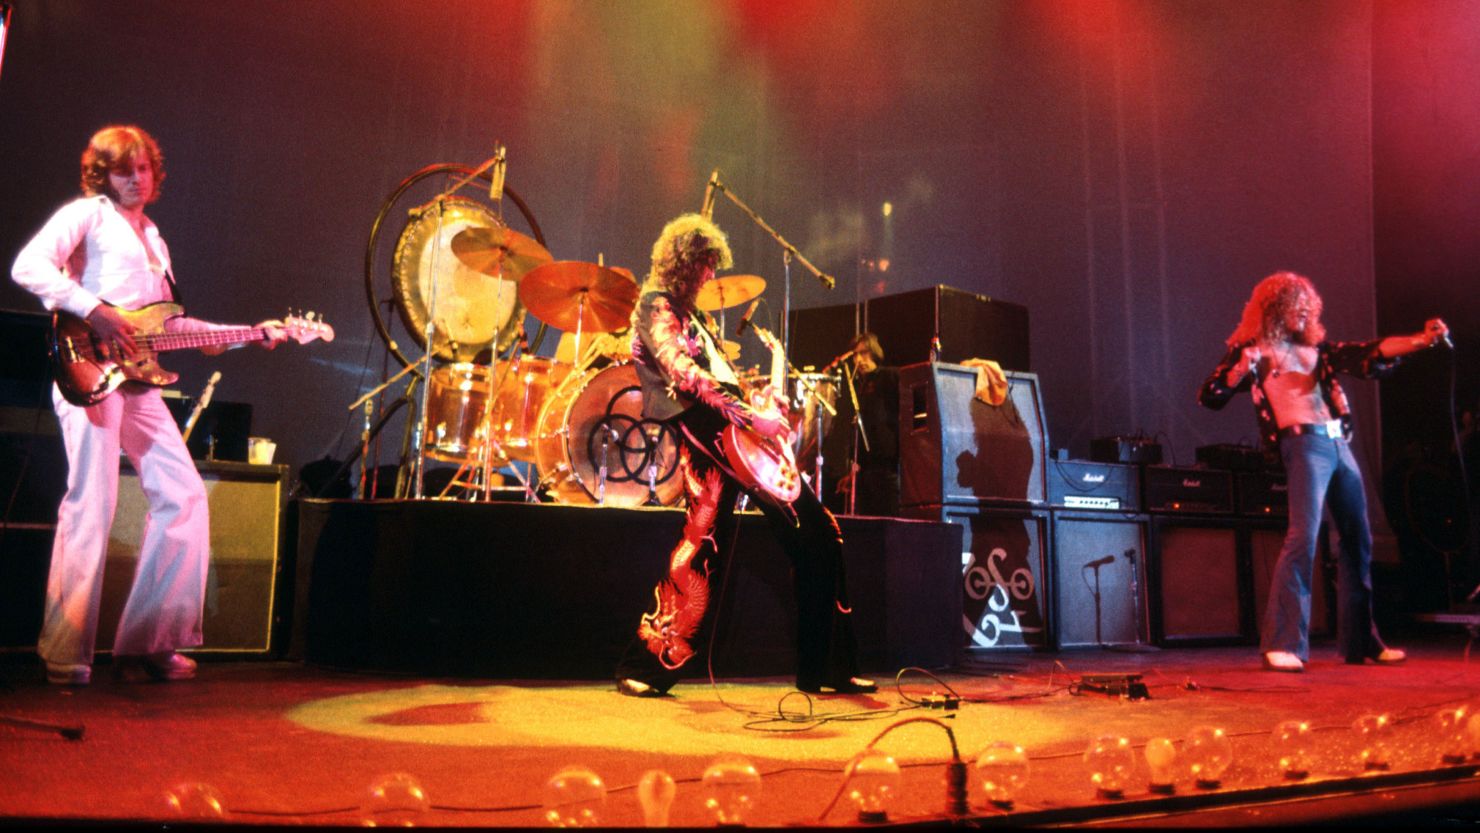 Led Zeppelin was accused ripping off the opening riff to "Stairway to Heaven."